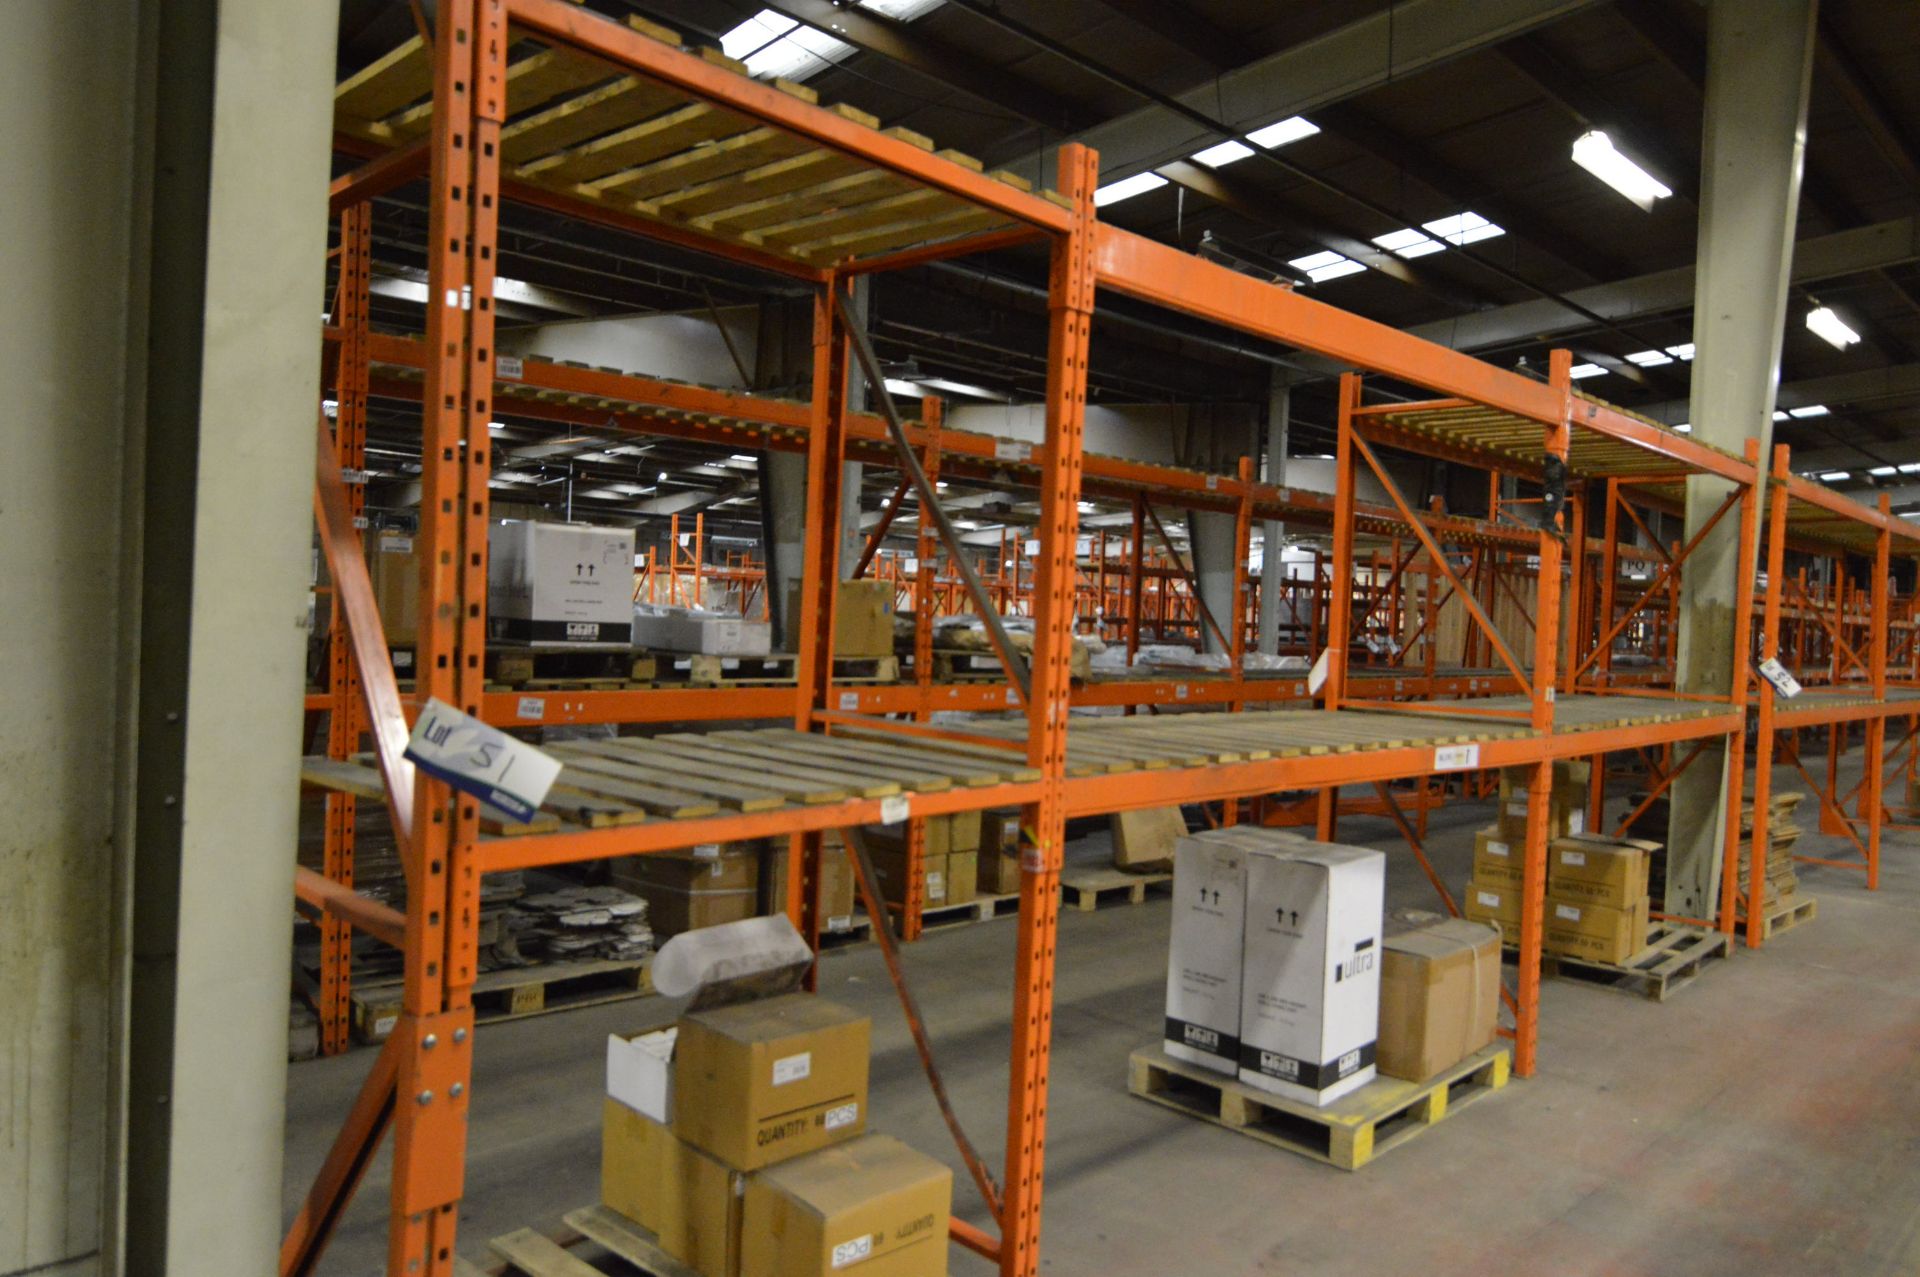 Redirack SD170 Single Sided Three Bay Two Tier Pallet Rack, approx. 7m long x 900mm x 2.7m high,